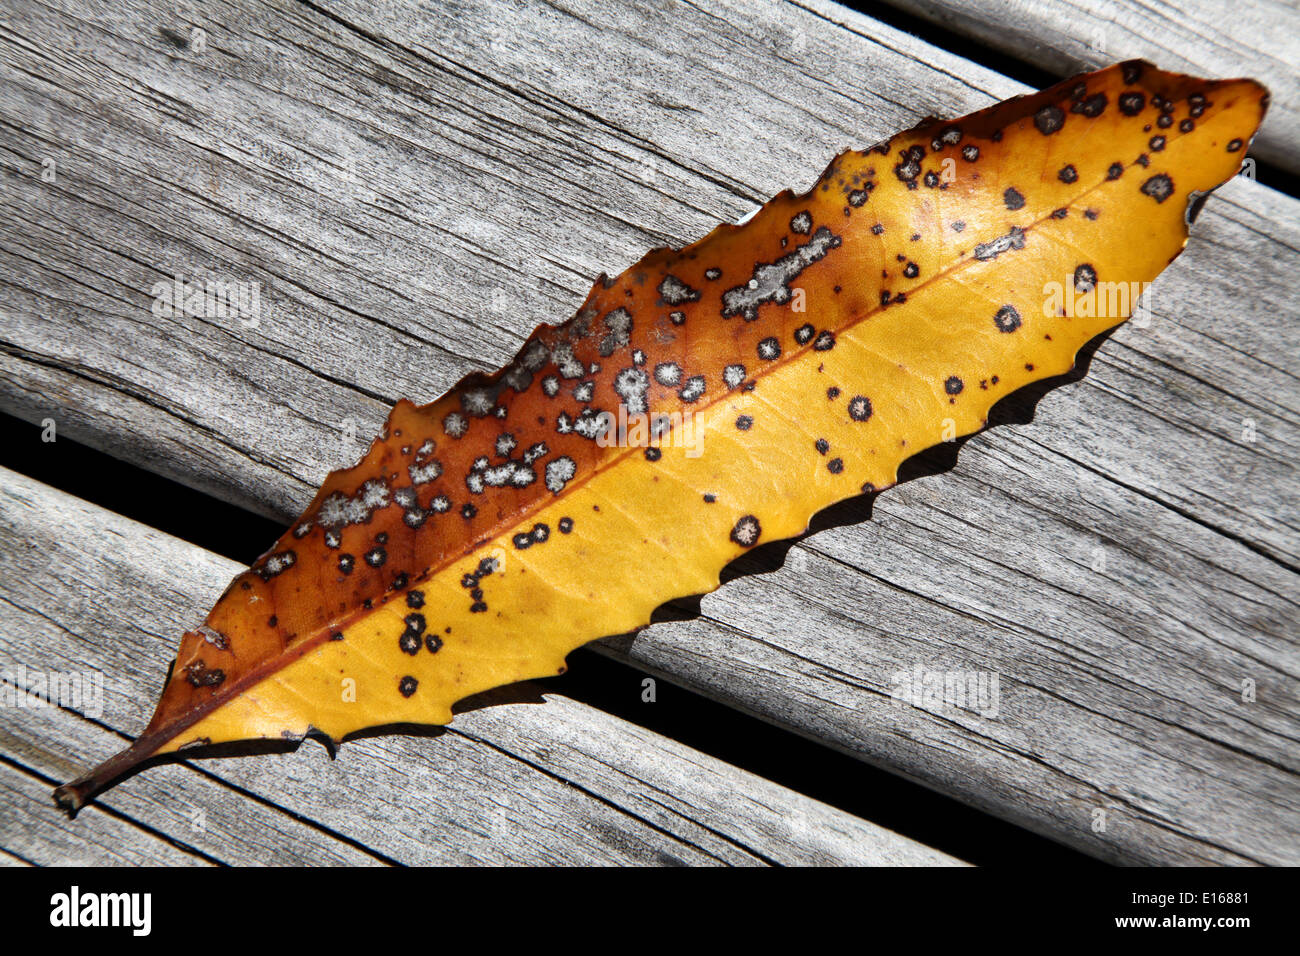 An old,speckled and decaying brown and gold leaf laying on a distressed timber bench Stock Photo